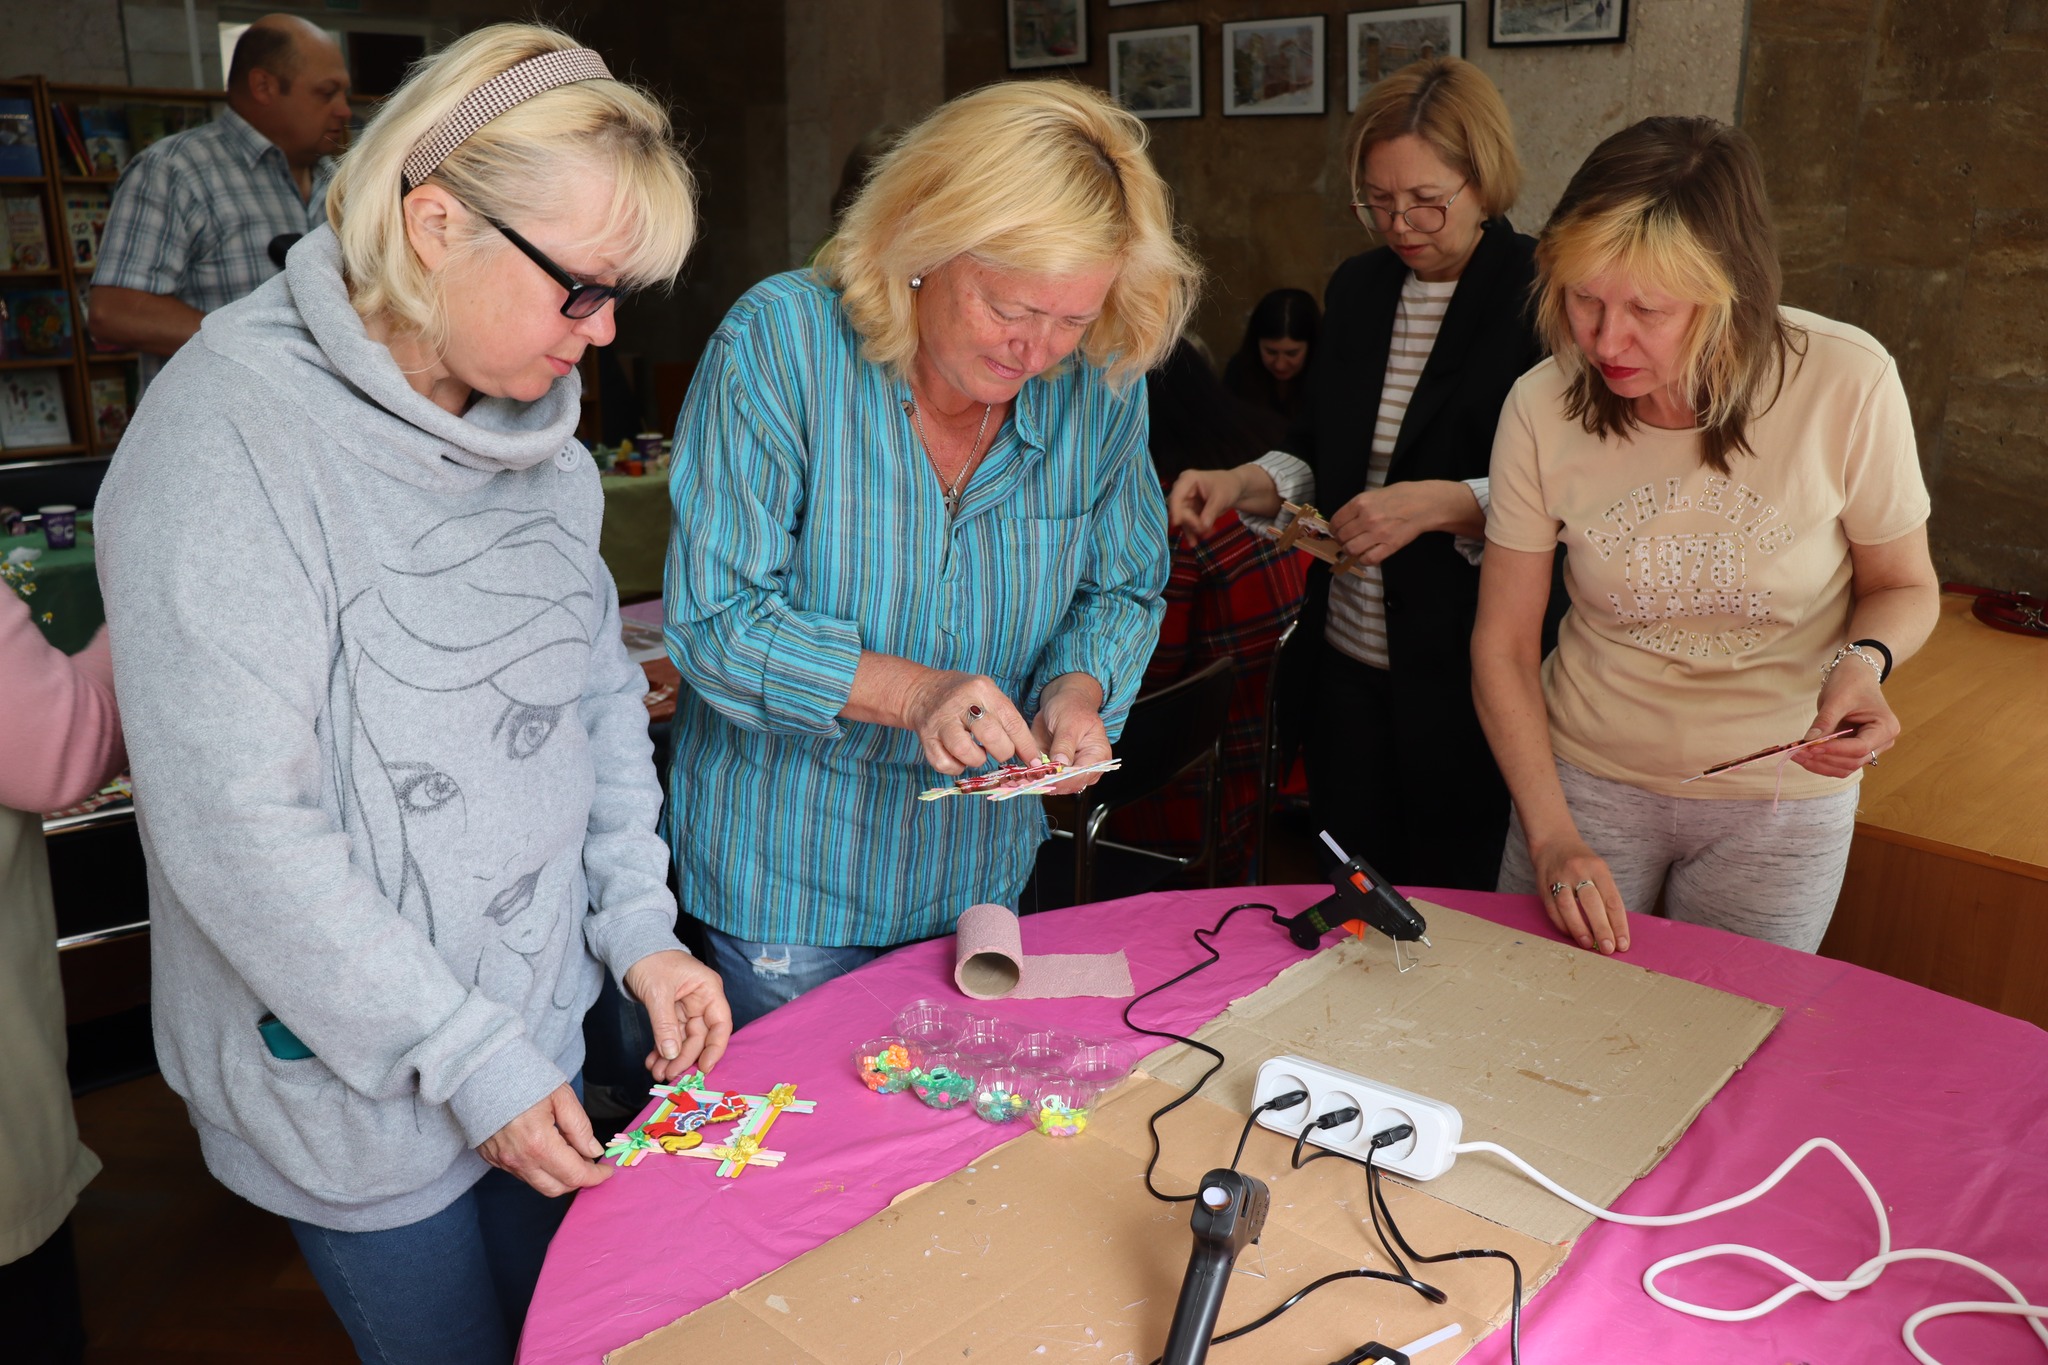 Regular readers were invited to a creative workshop to make a variation of a traditional Swedish souvenir